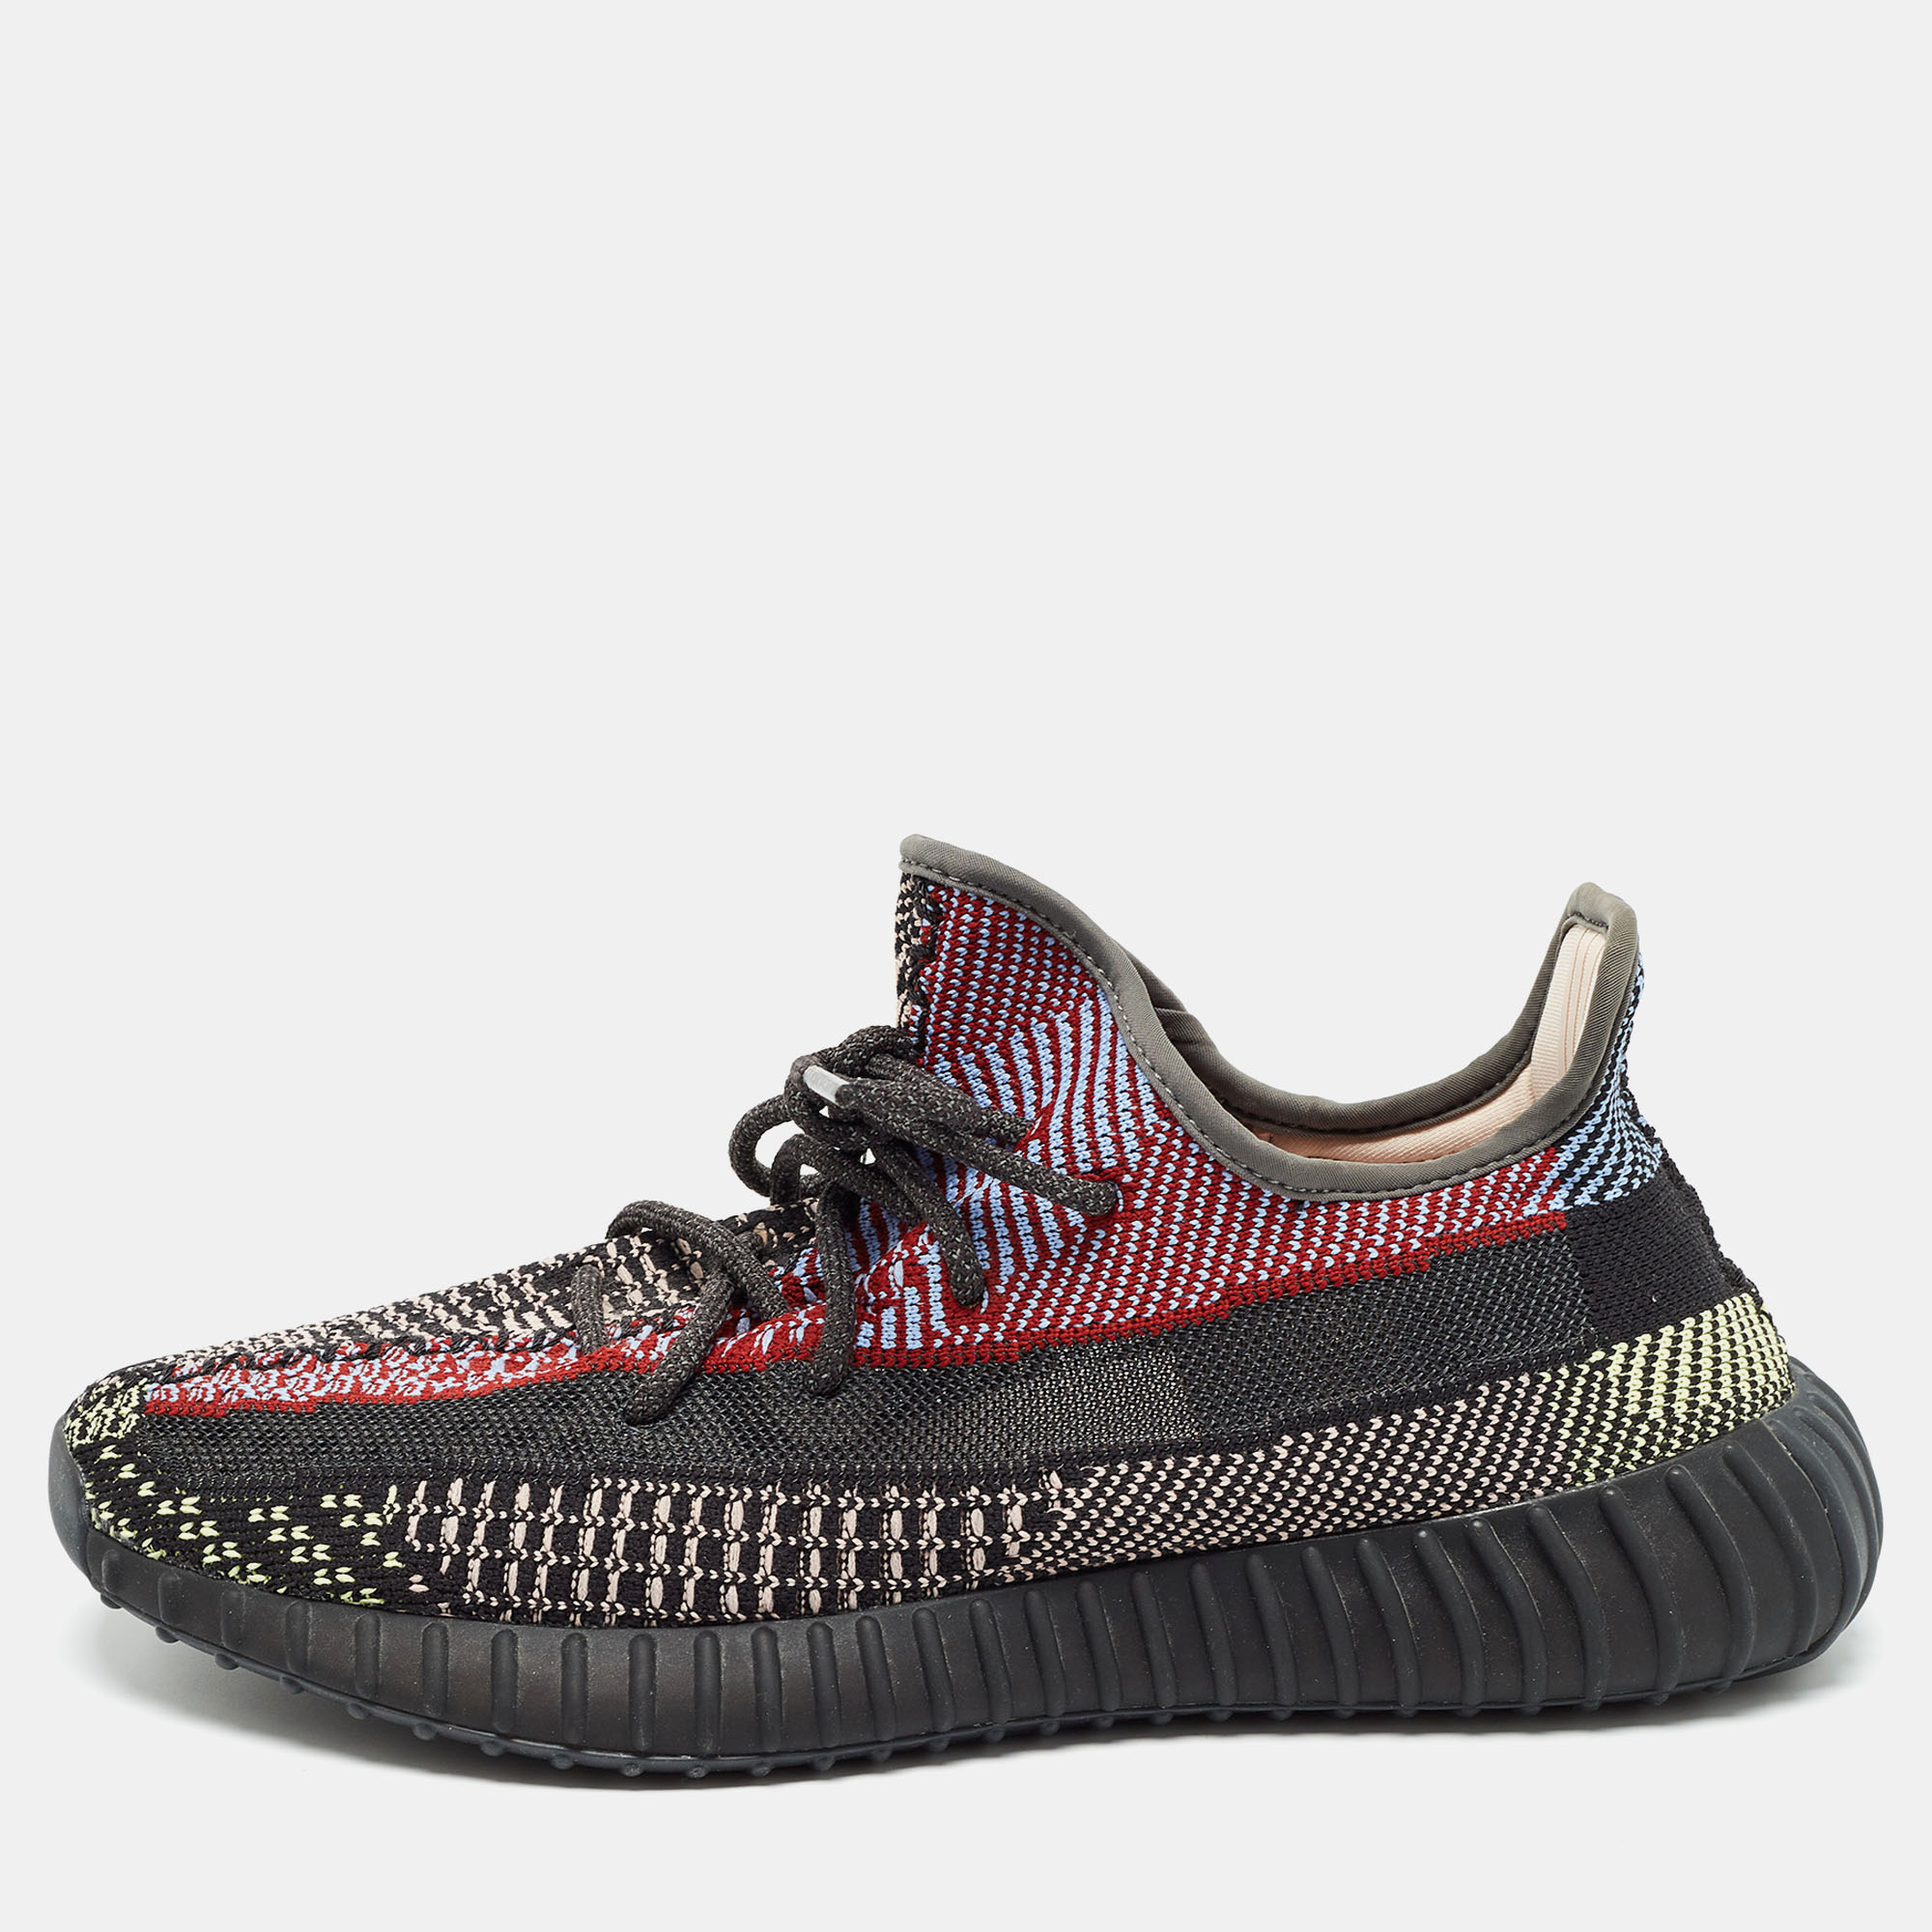 Pre-owned Yeezy X Adidas Multicolor Knit Fabric Boost 350 V2 Yecheil (non-reflective) Sneakers Size 44